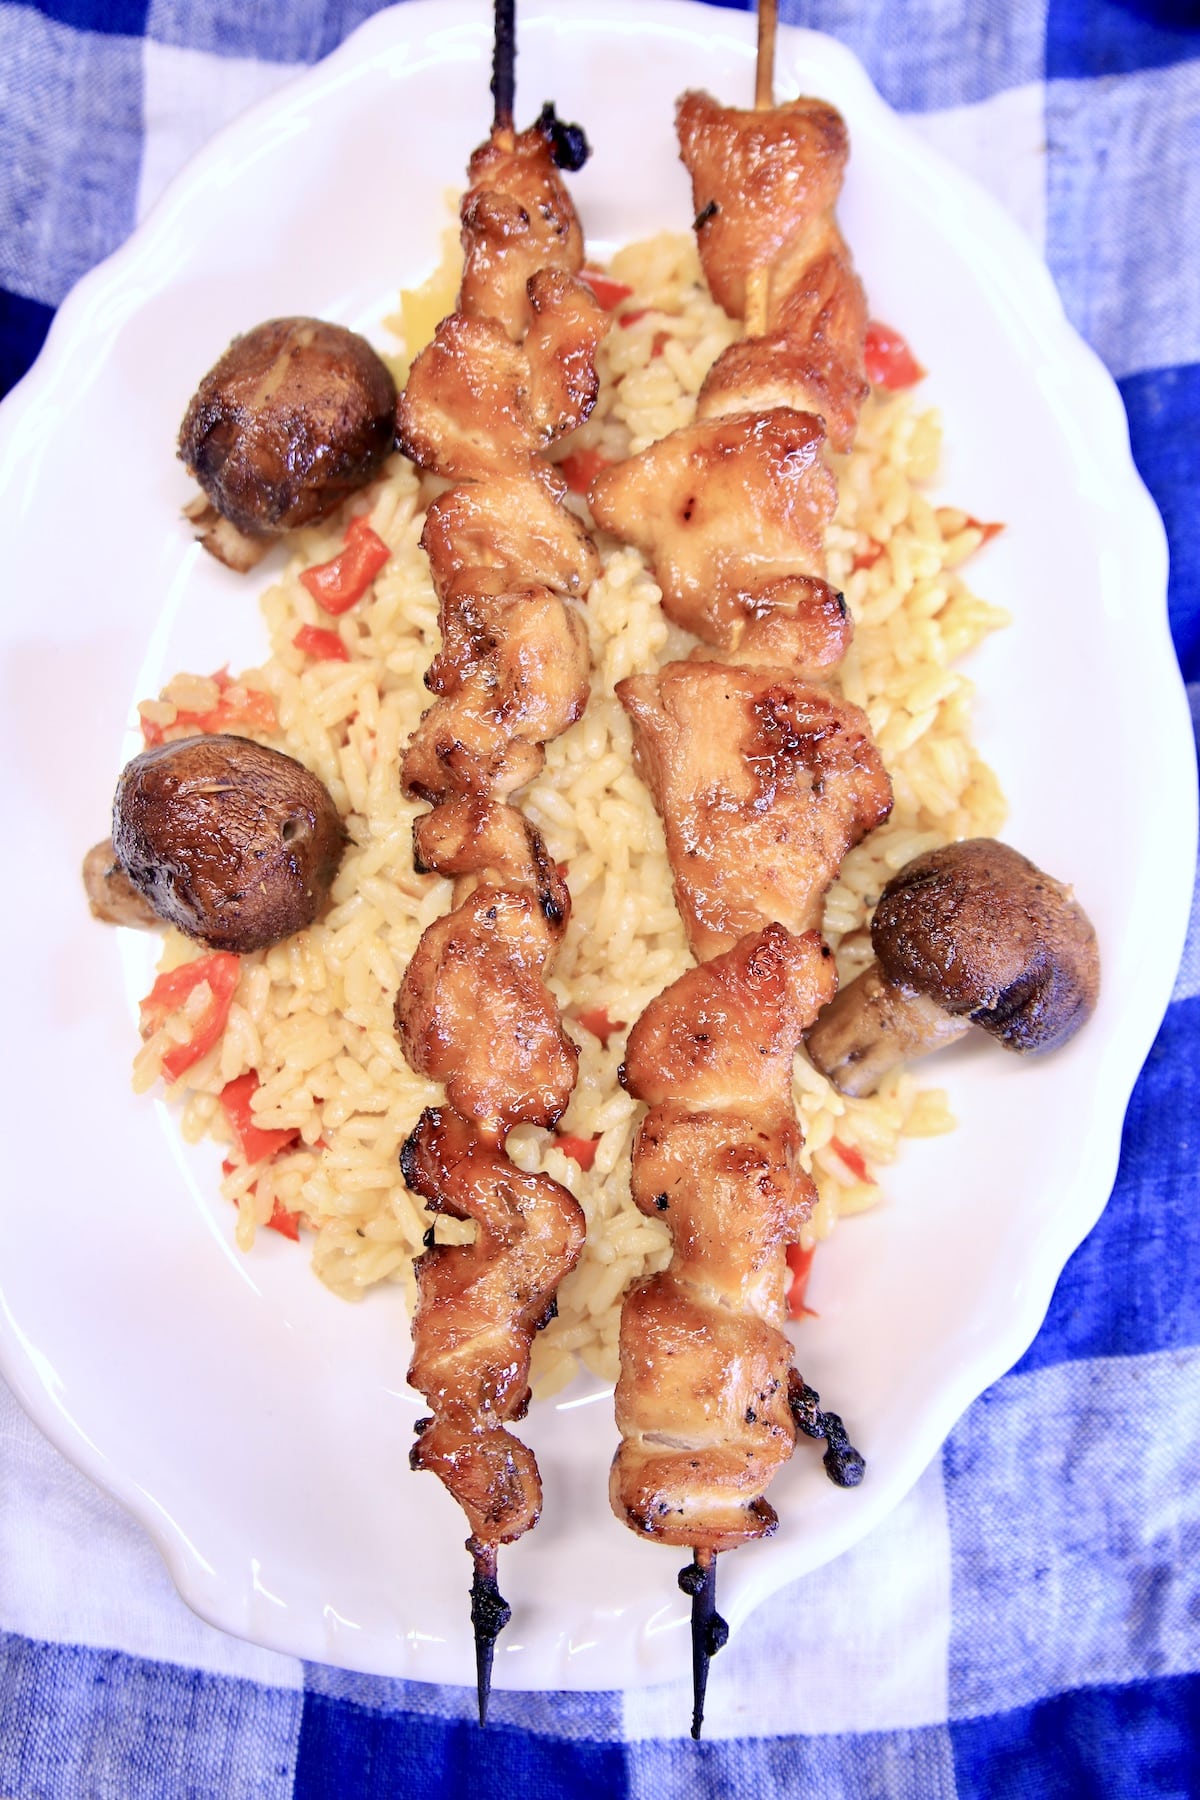 Plate of rice, chicken skewers and mushrooms.